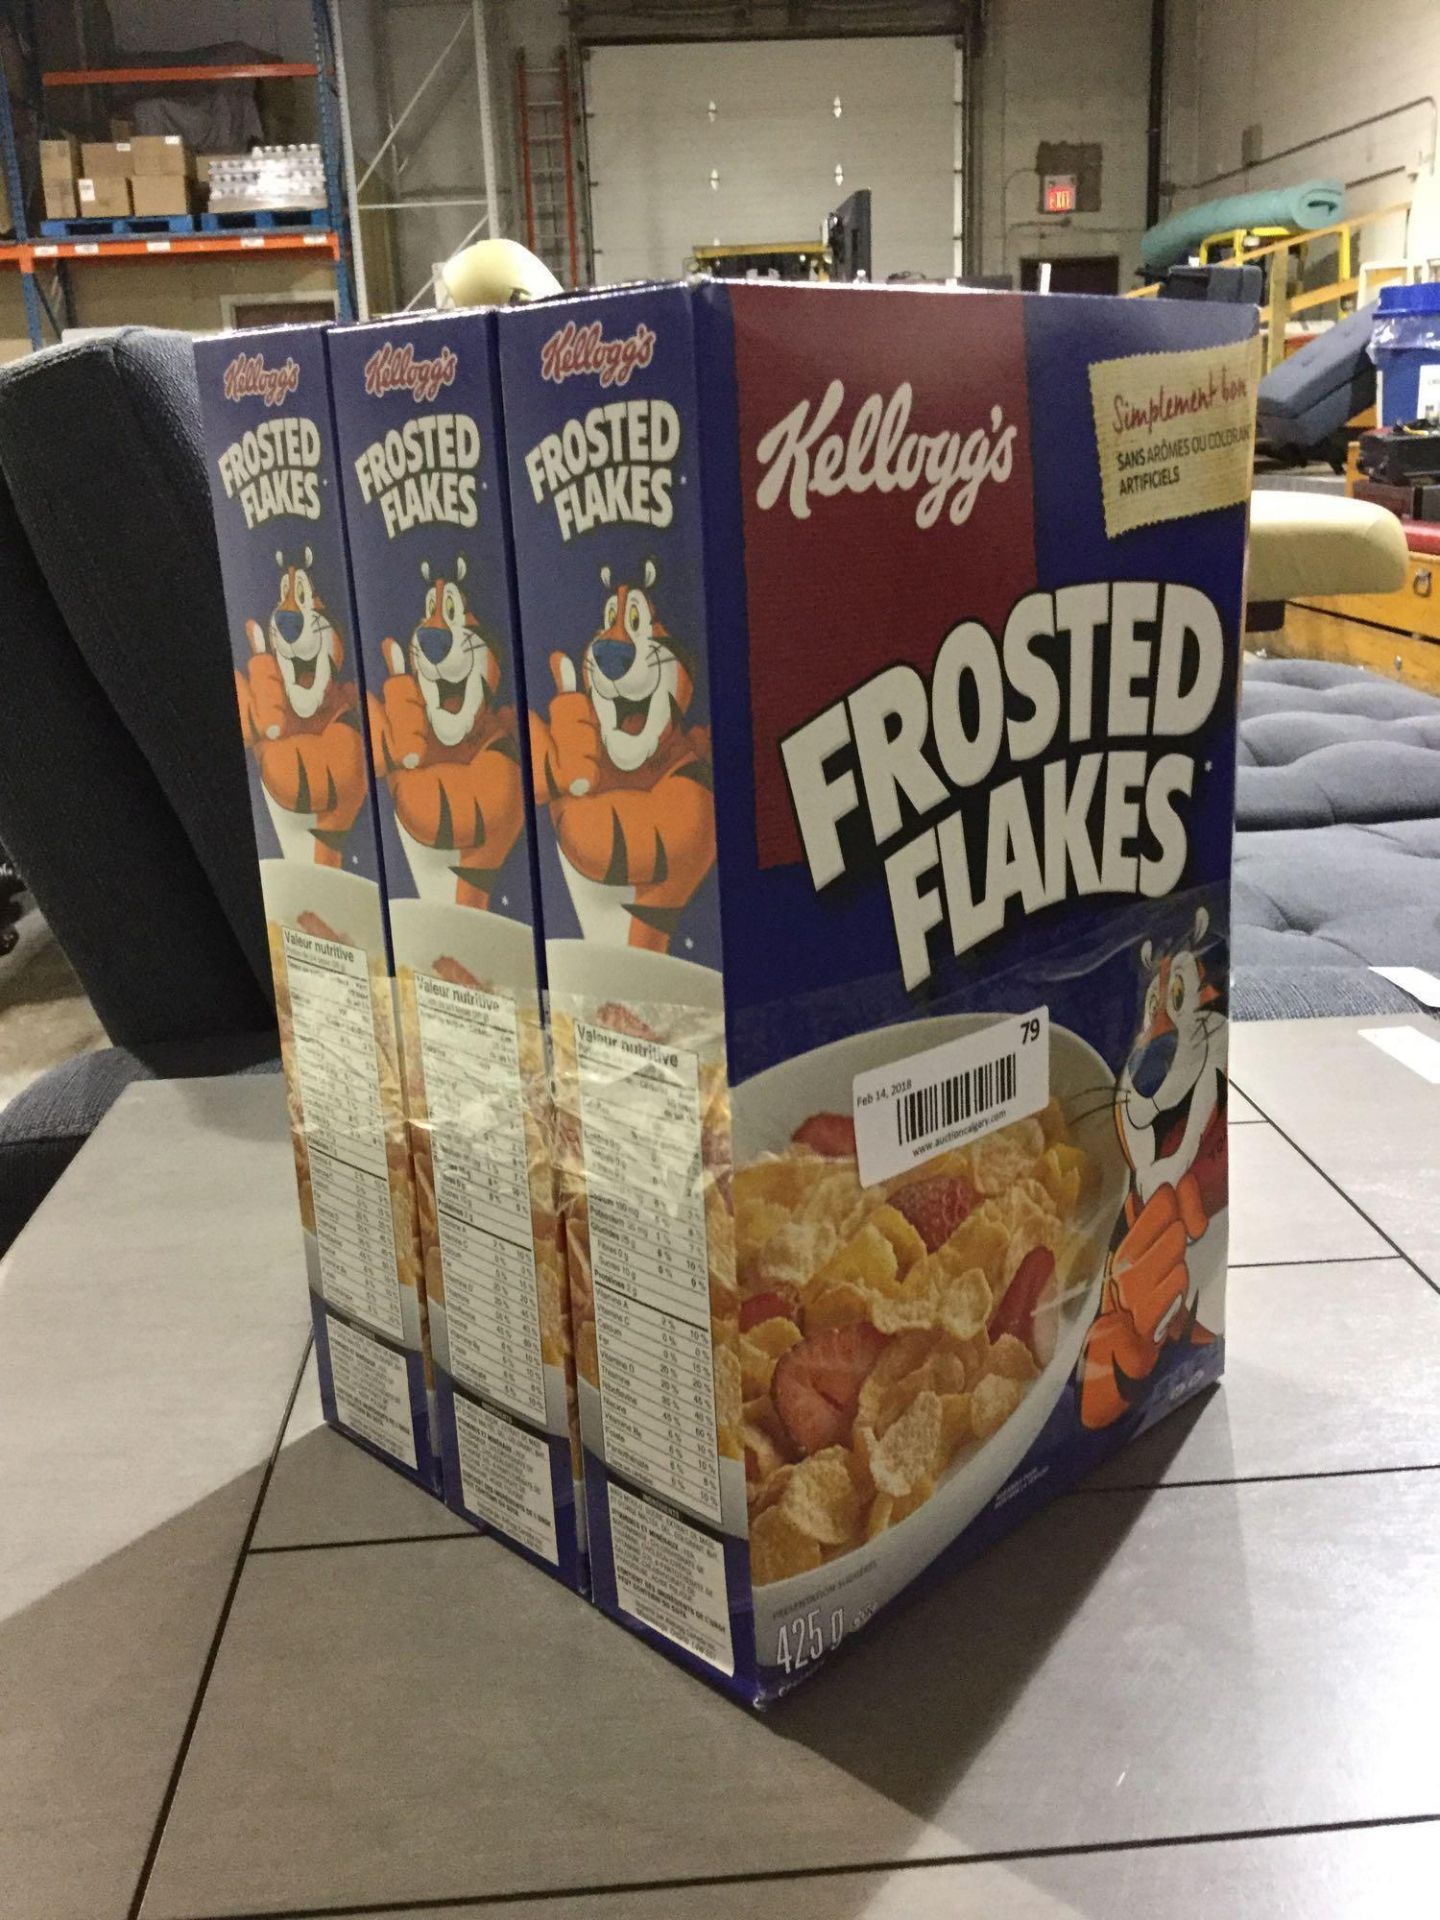 Lot of 3 x 425 g Kellogg's Frosted Flakes